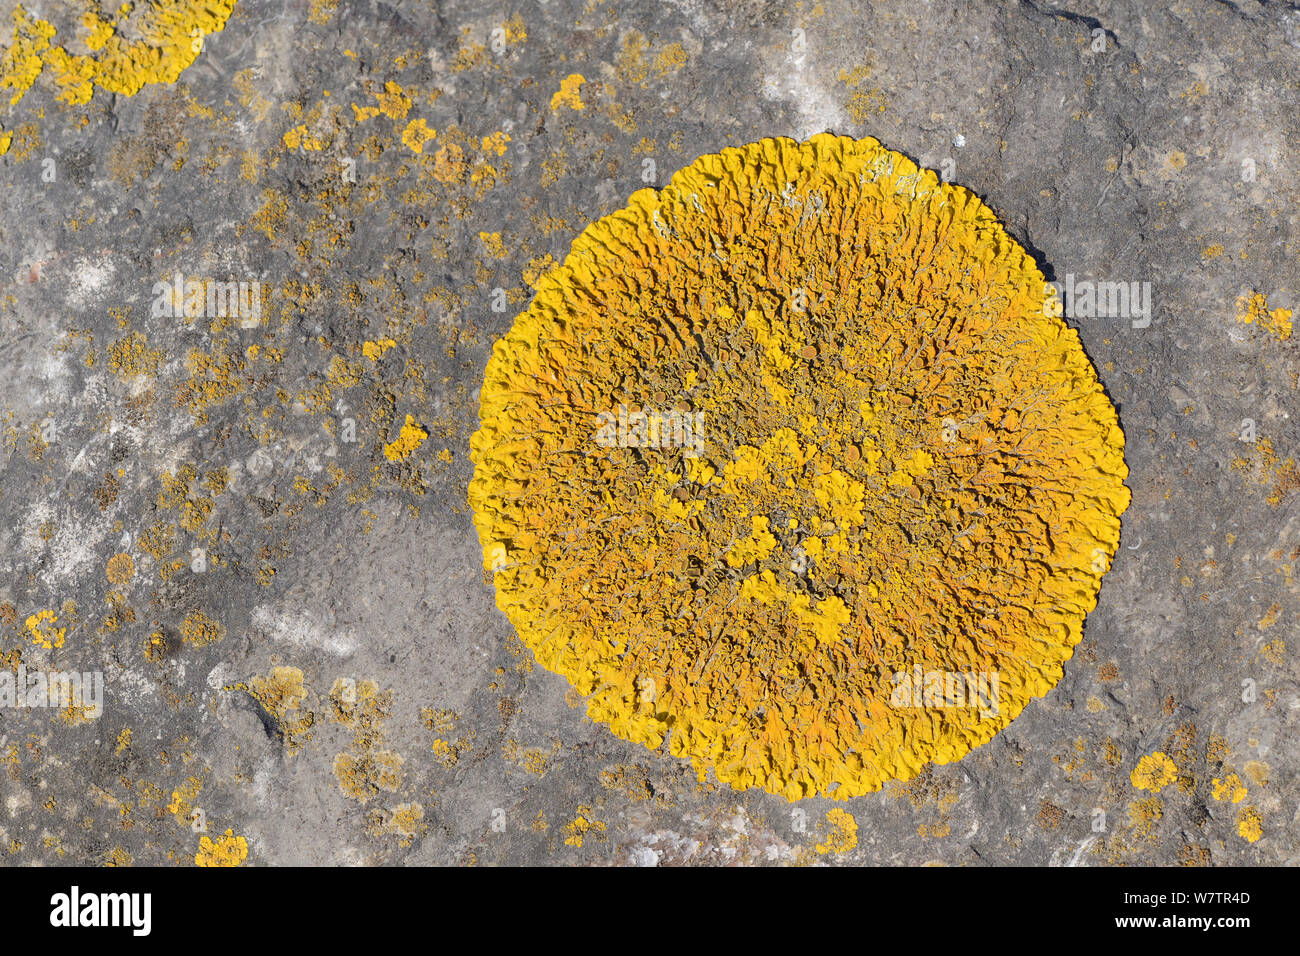 Circular patch of Common orange lichen (Xanthoria parietina) growing on rocks just above the high tide line, Severn Beach, Somerset, UK, April. Stock Photo